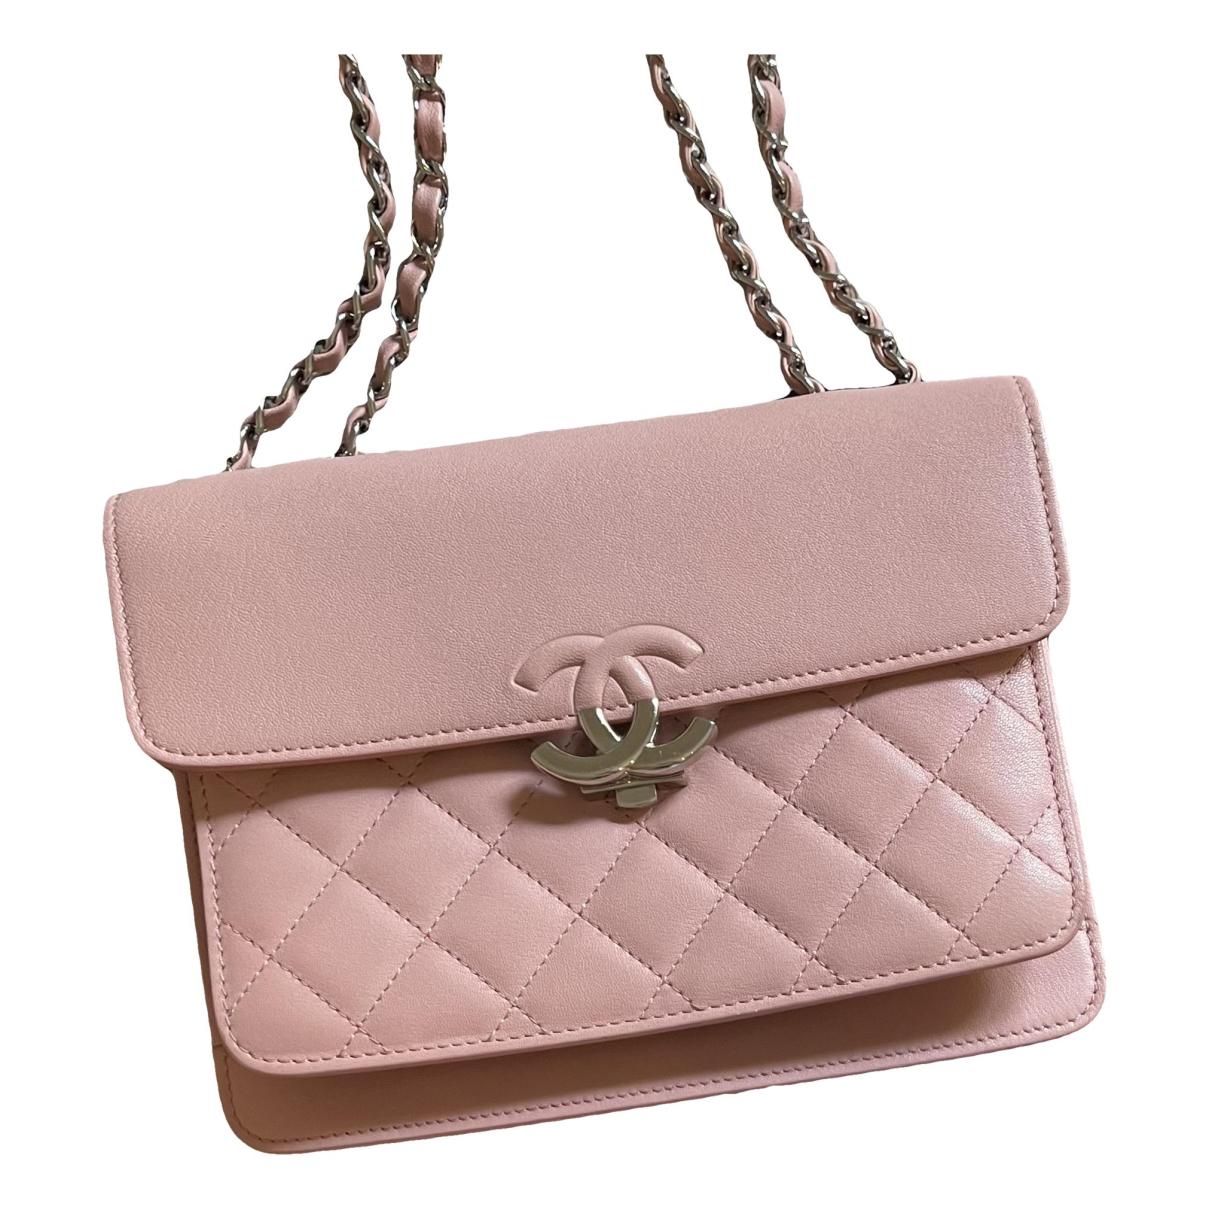 Trendy cc flap leather handbag Chanel Pink in Leather - 34511965